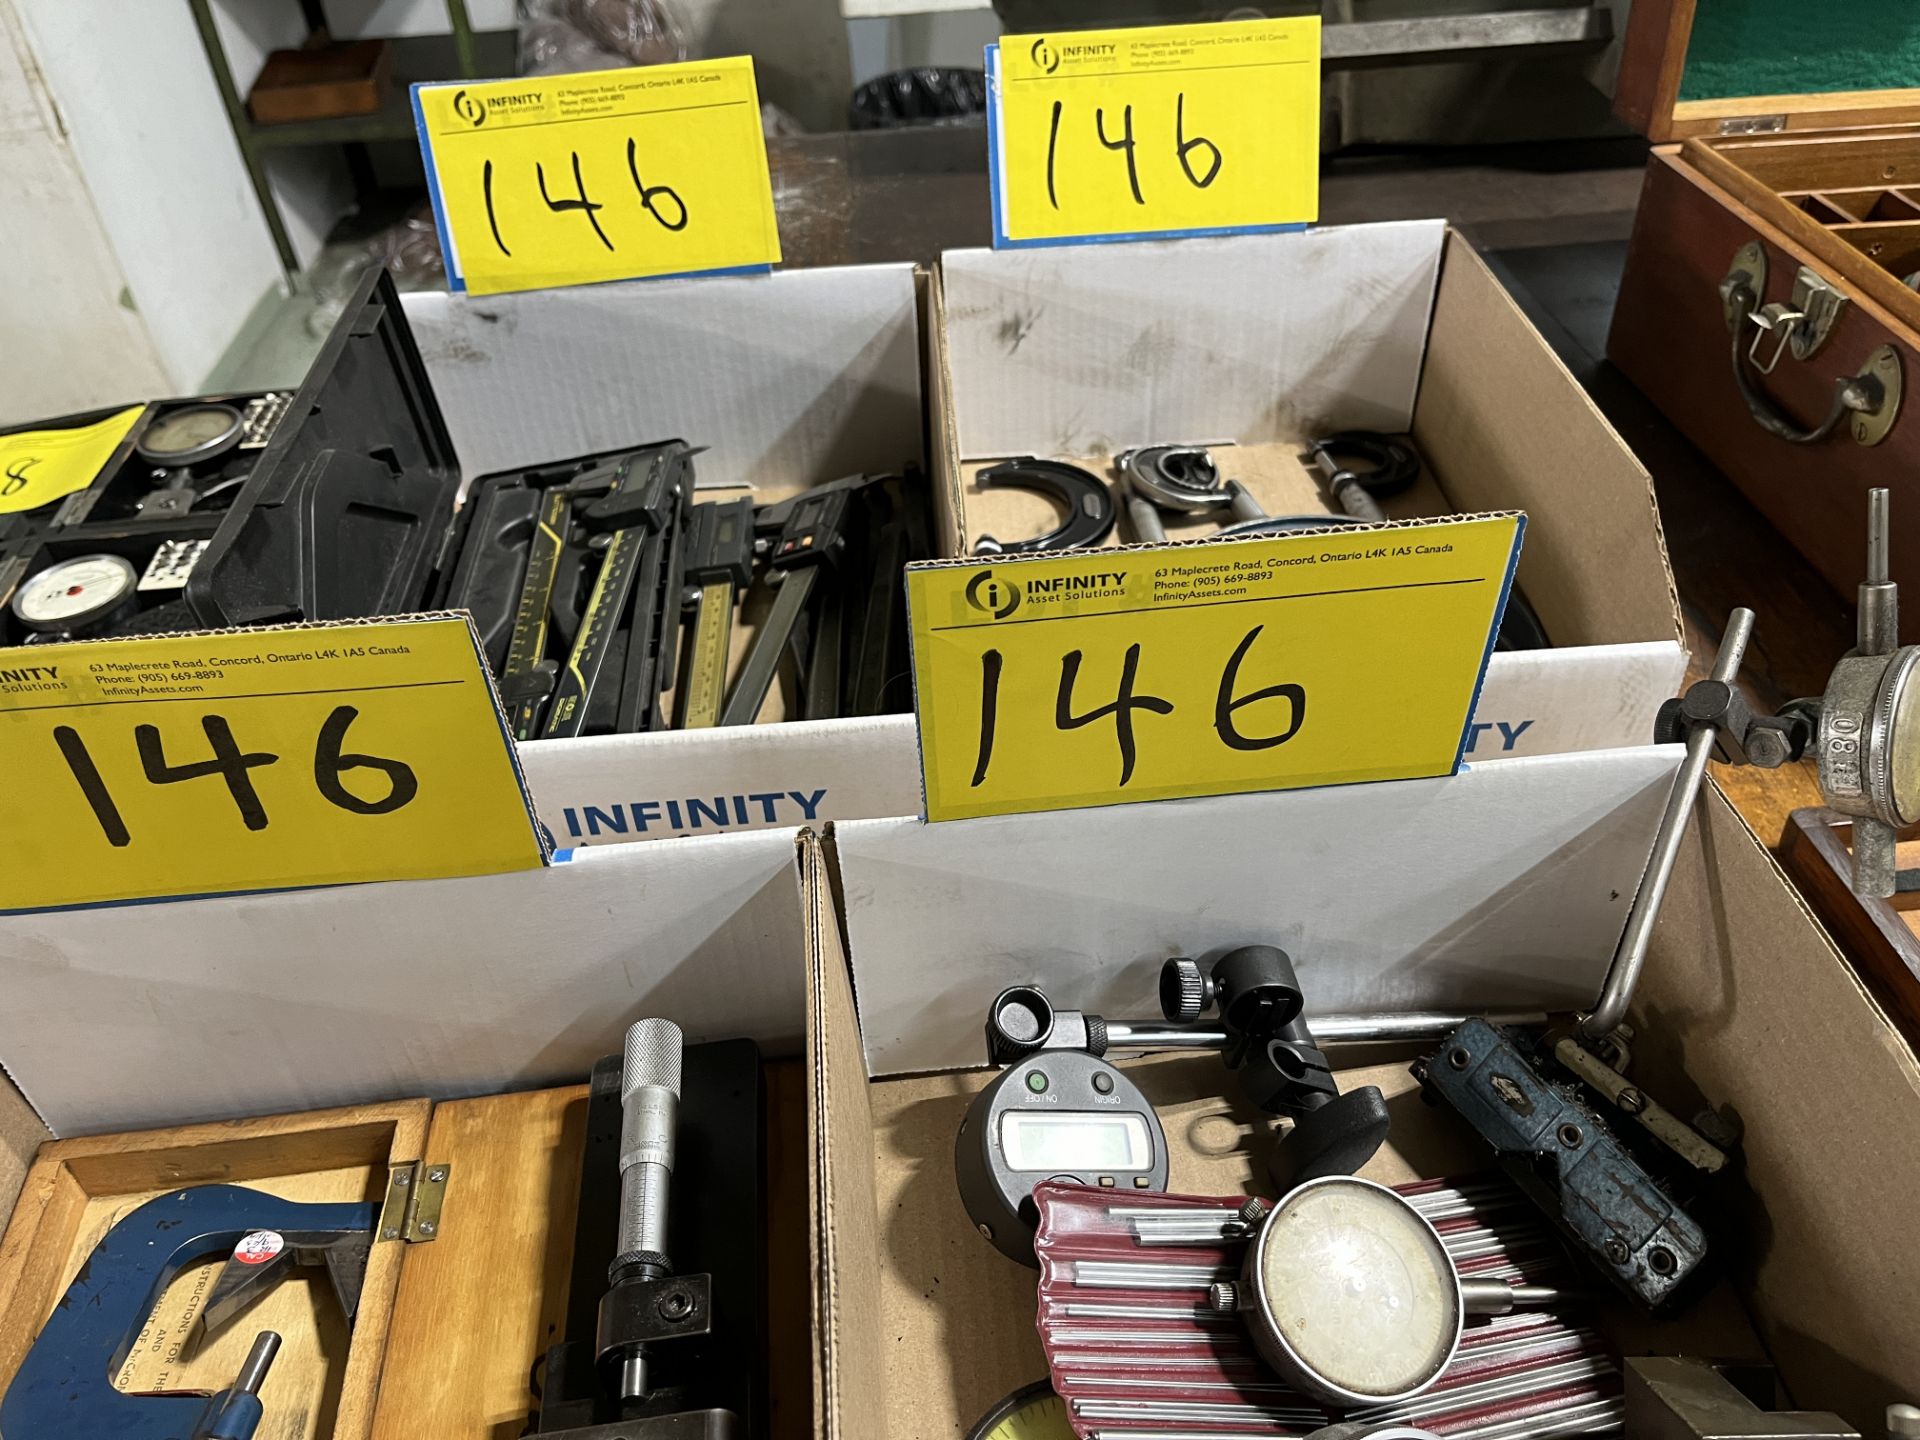 LOT OF (4) BOXES OF VERNIERS, MICROMETERS, DIAL GAUGES, CALIPERS - Image 2 of 2